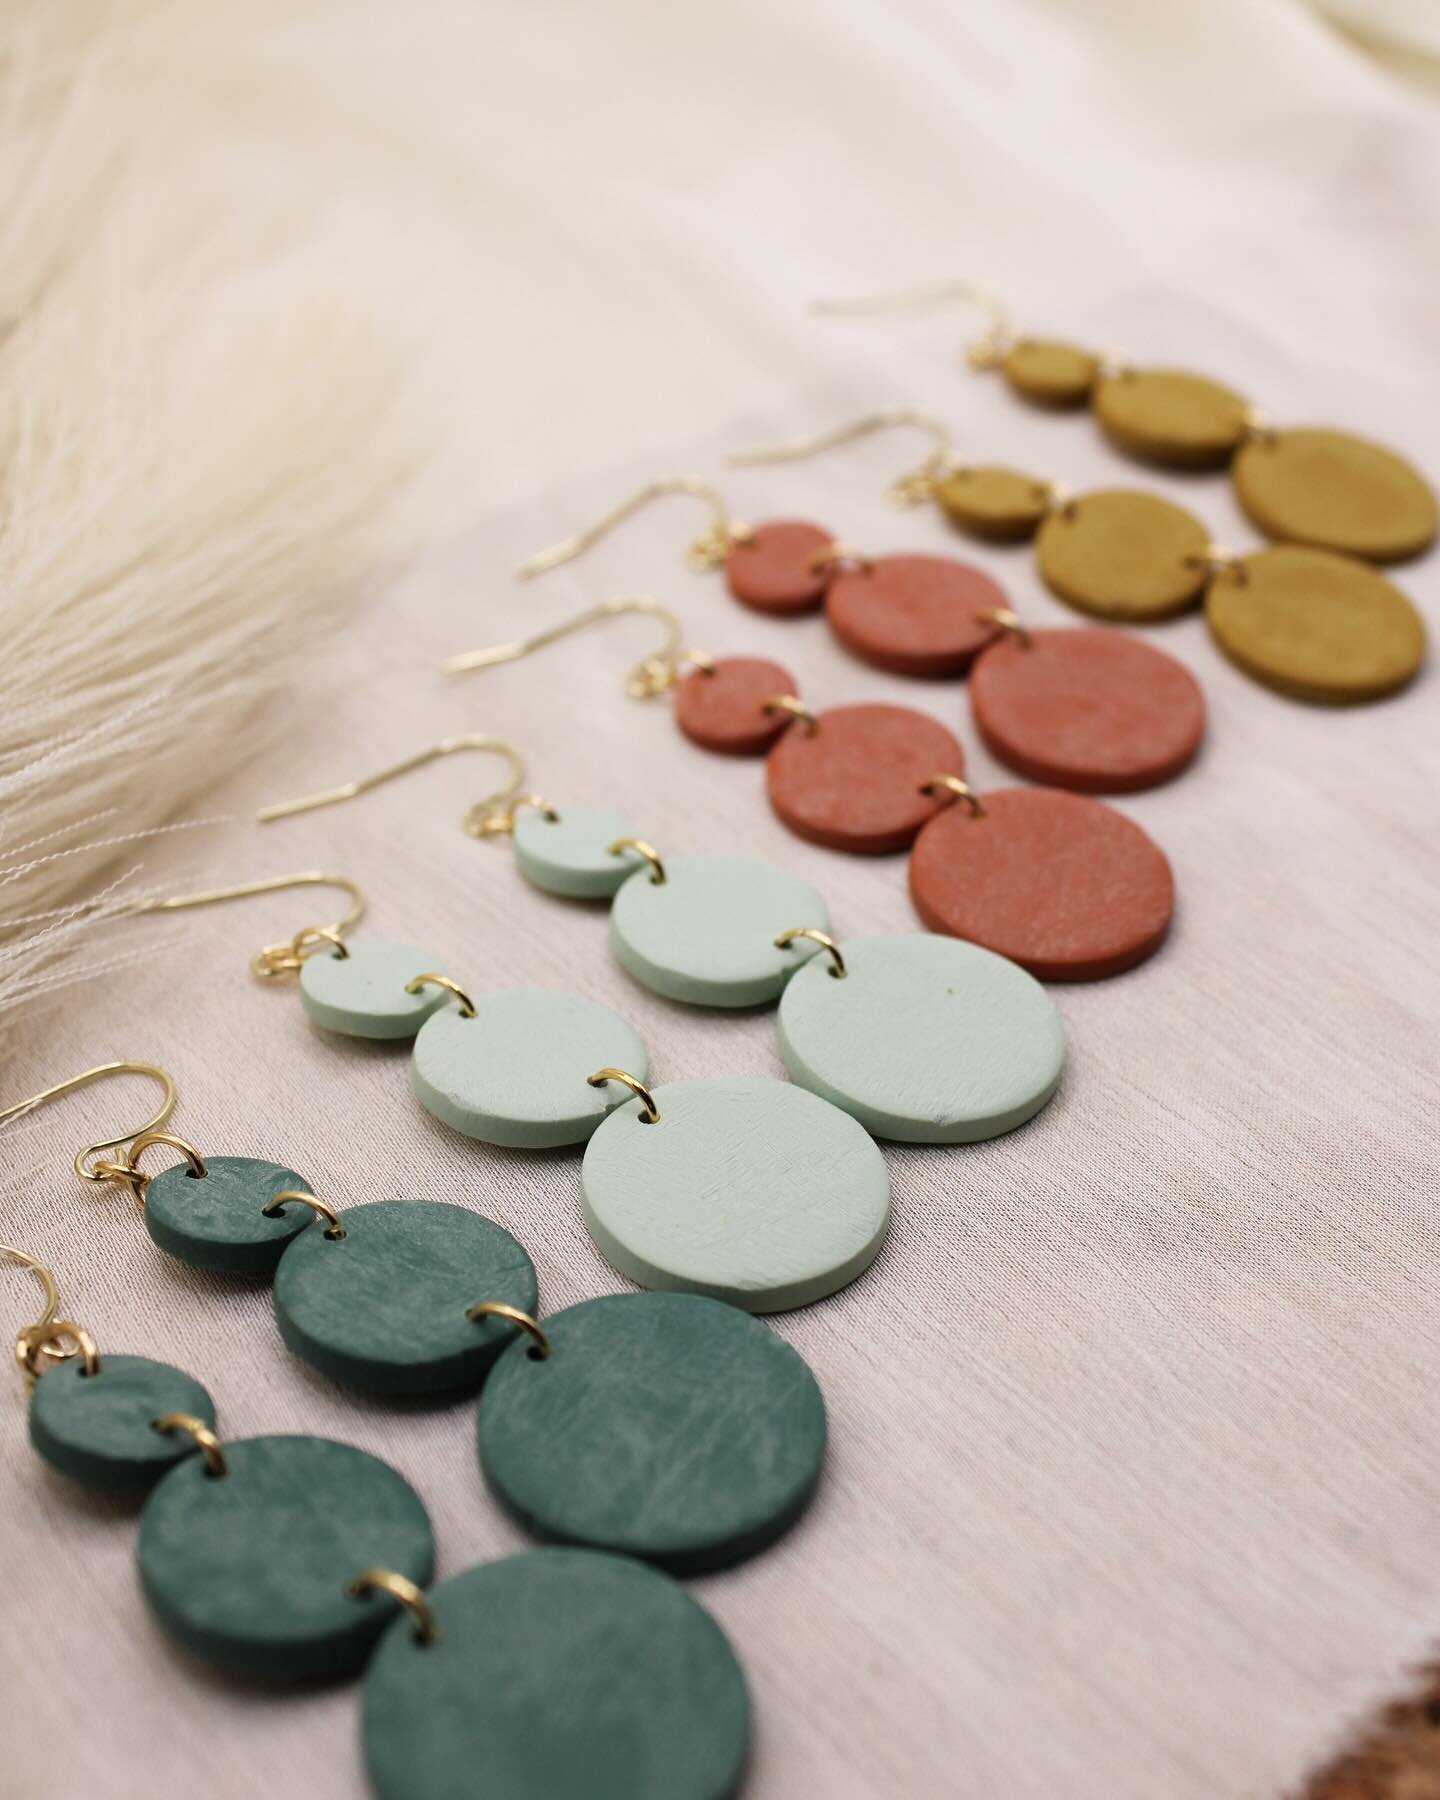 Getting some new pretties up on the website this weekend! New earrings launching tomorrow at 5pm!